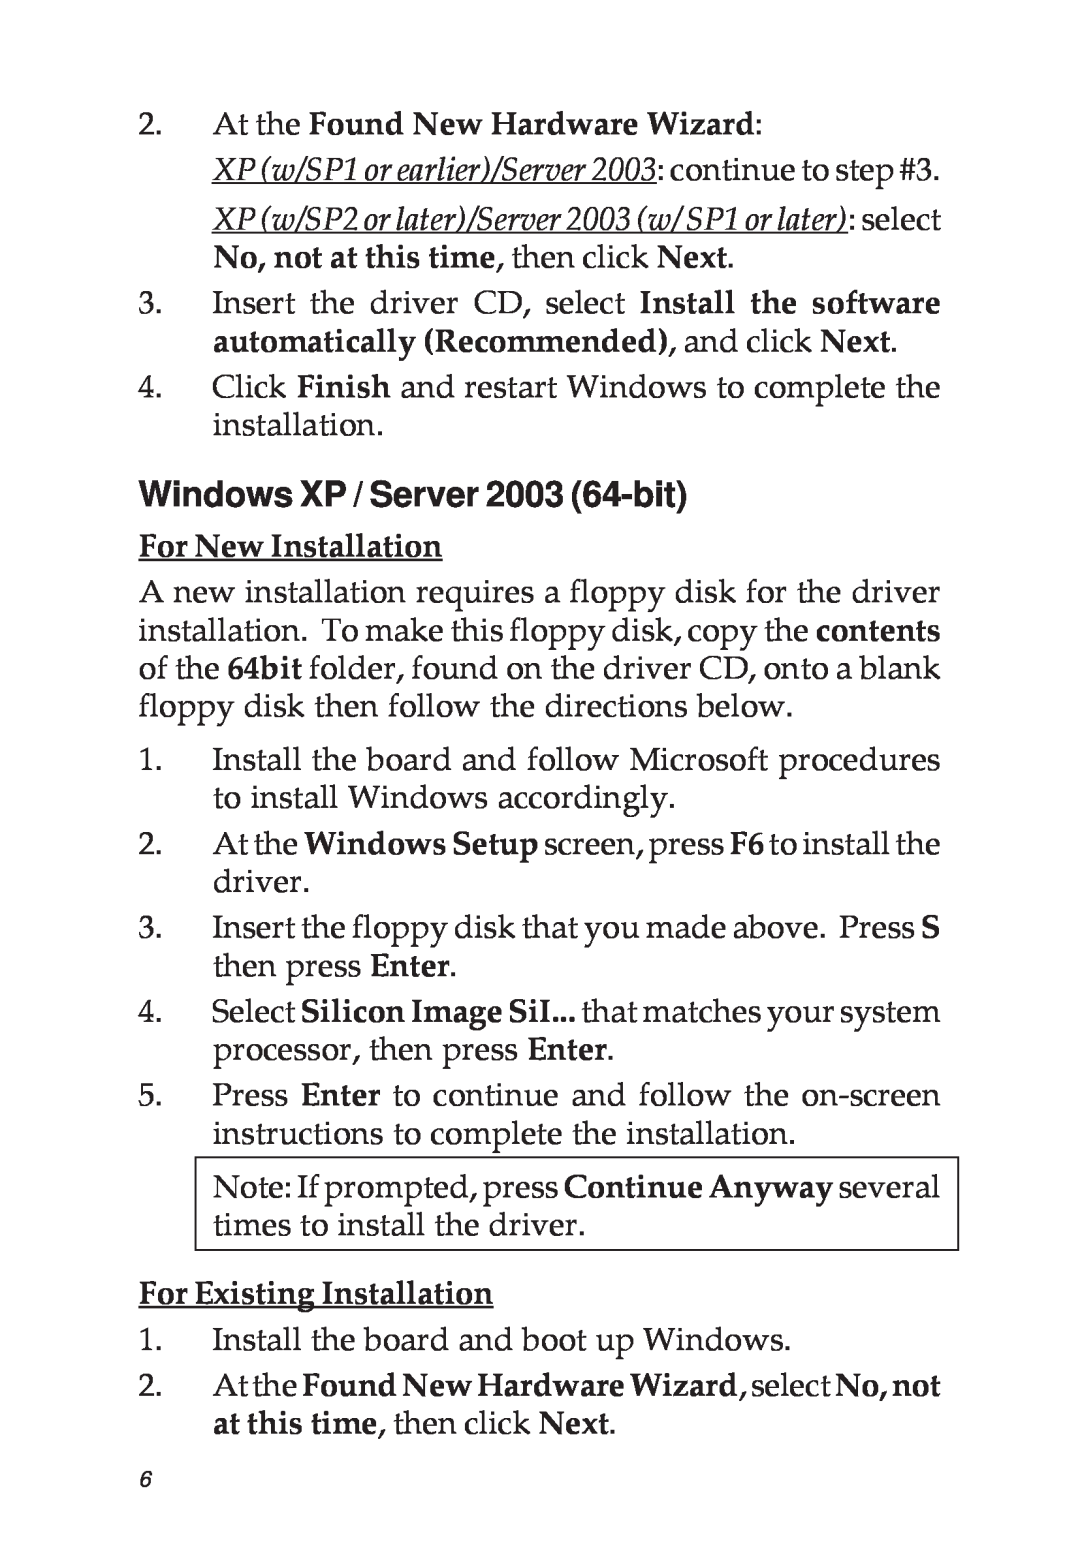 SIIG 04-0322C manual Windows XP / Server 2003 64-bit, XP w/SP1 or earlier/Server 2003 continue to step #3 